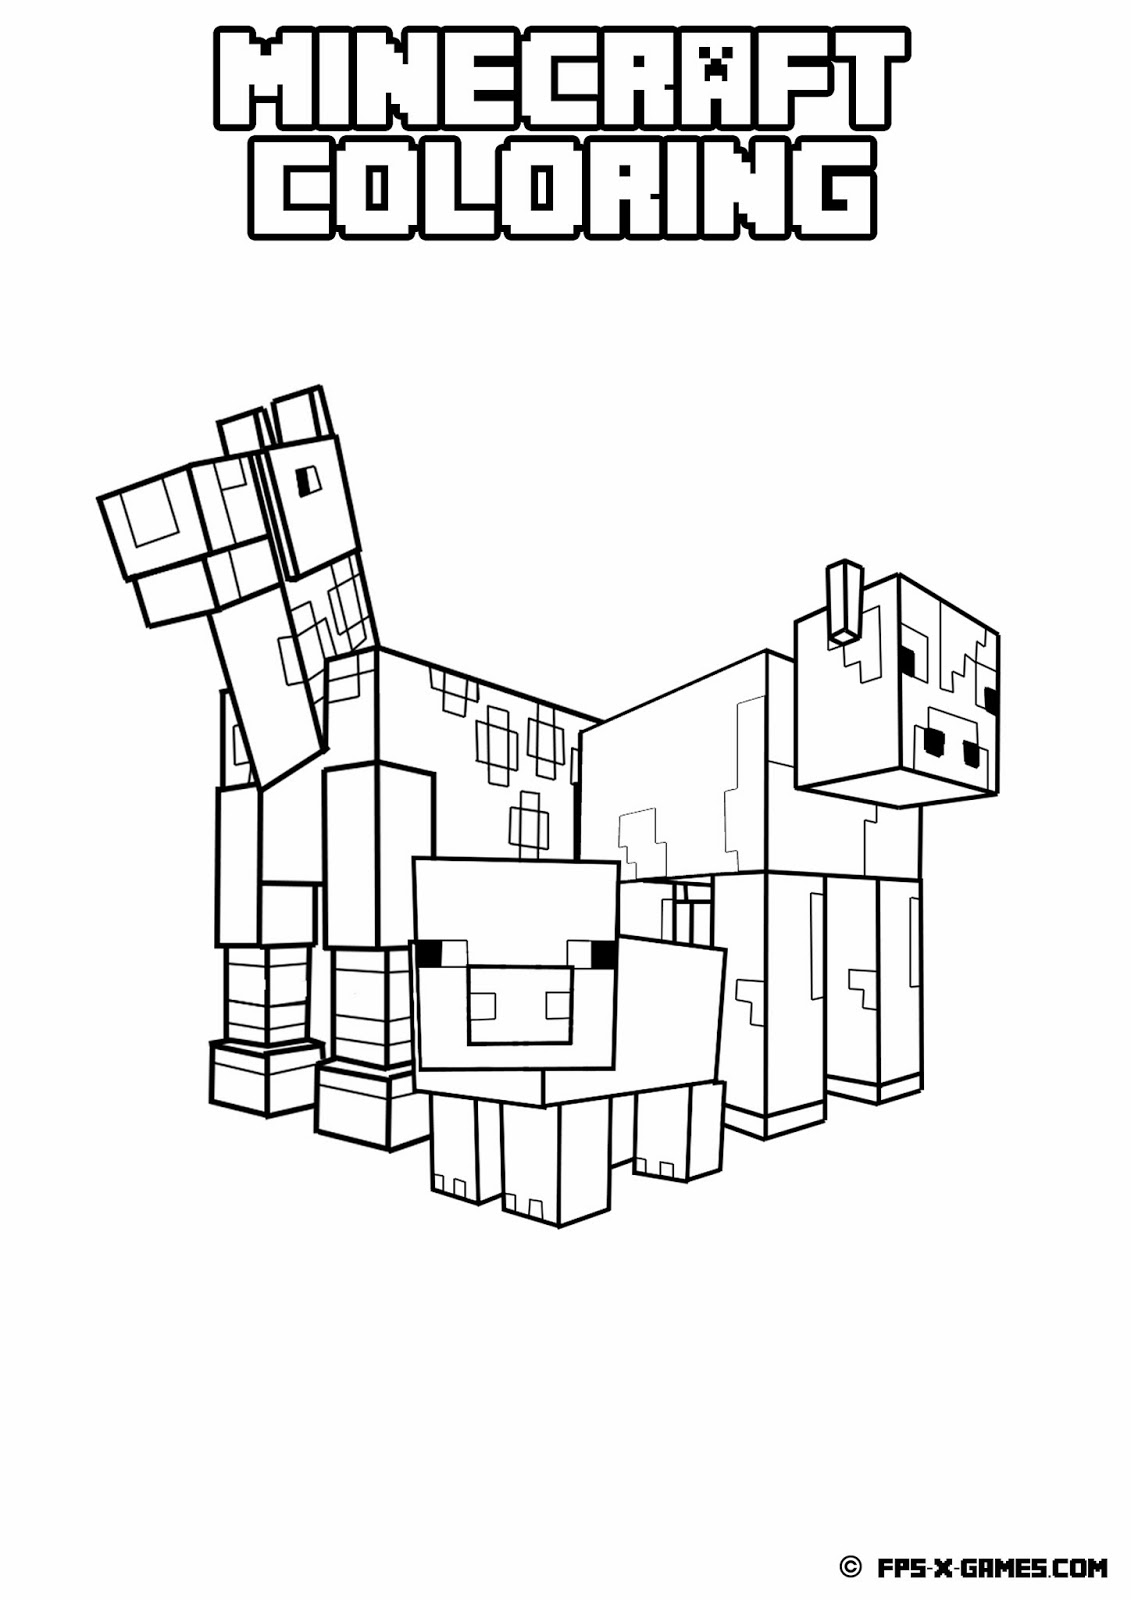 minecraft coloring and coloring pages on pinterest on minecraft coloring pages printable id=74084